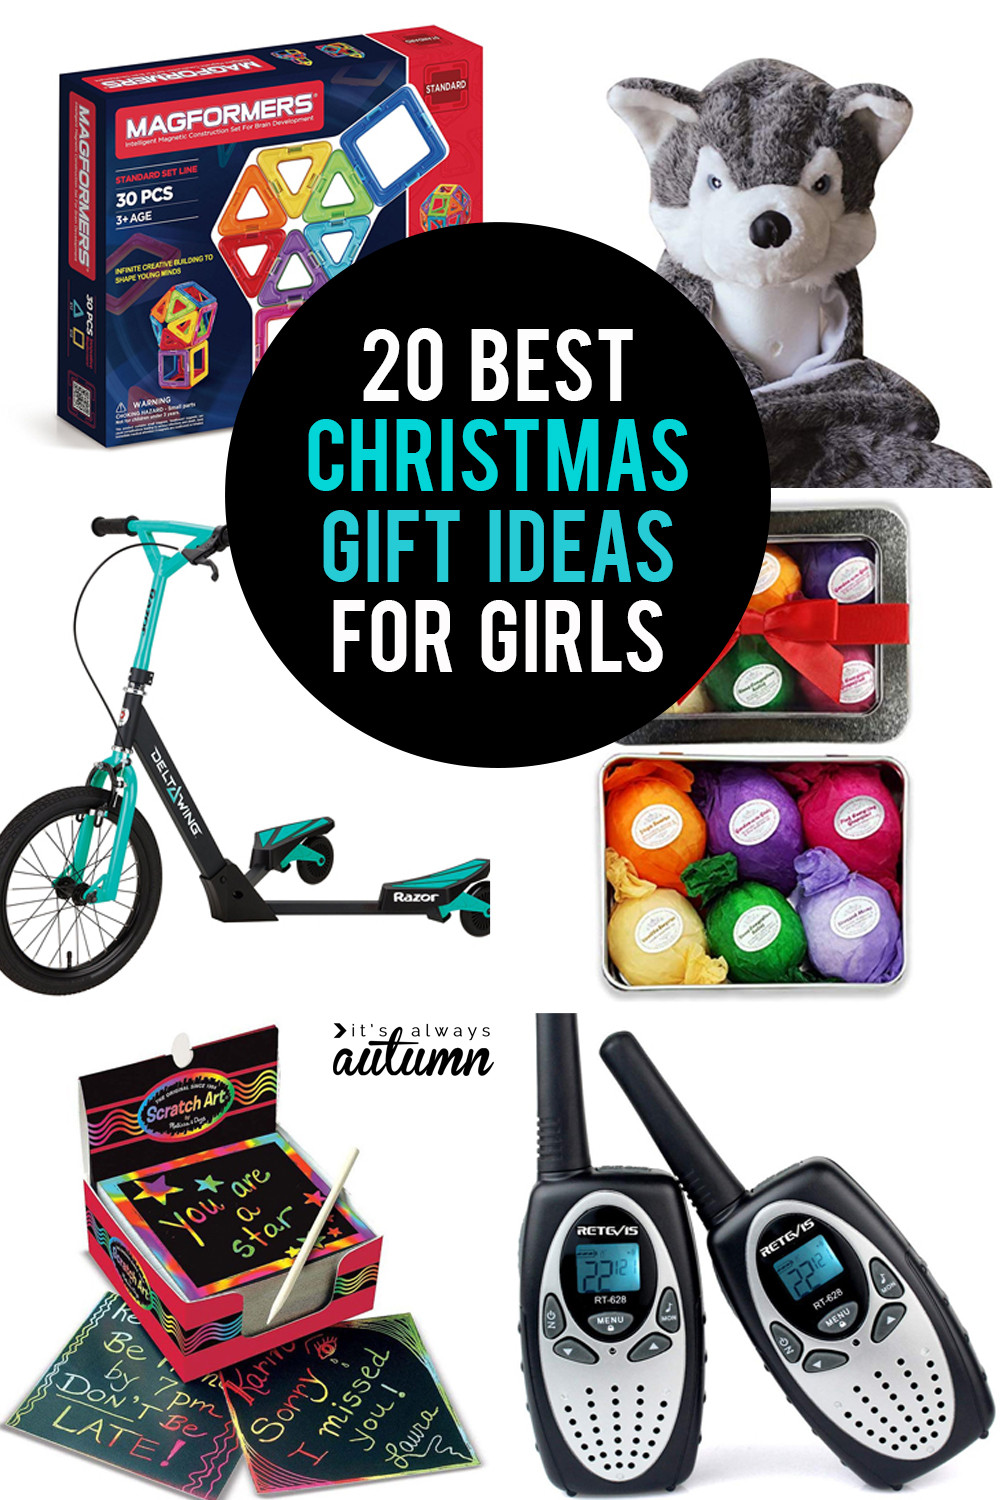 Xmas Gift Ideas For Girls
 The 20 best Christmas ts for girls It s Always Autumn